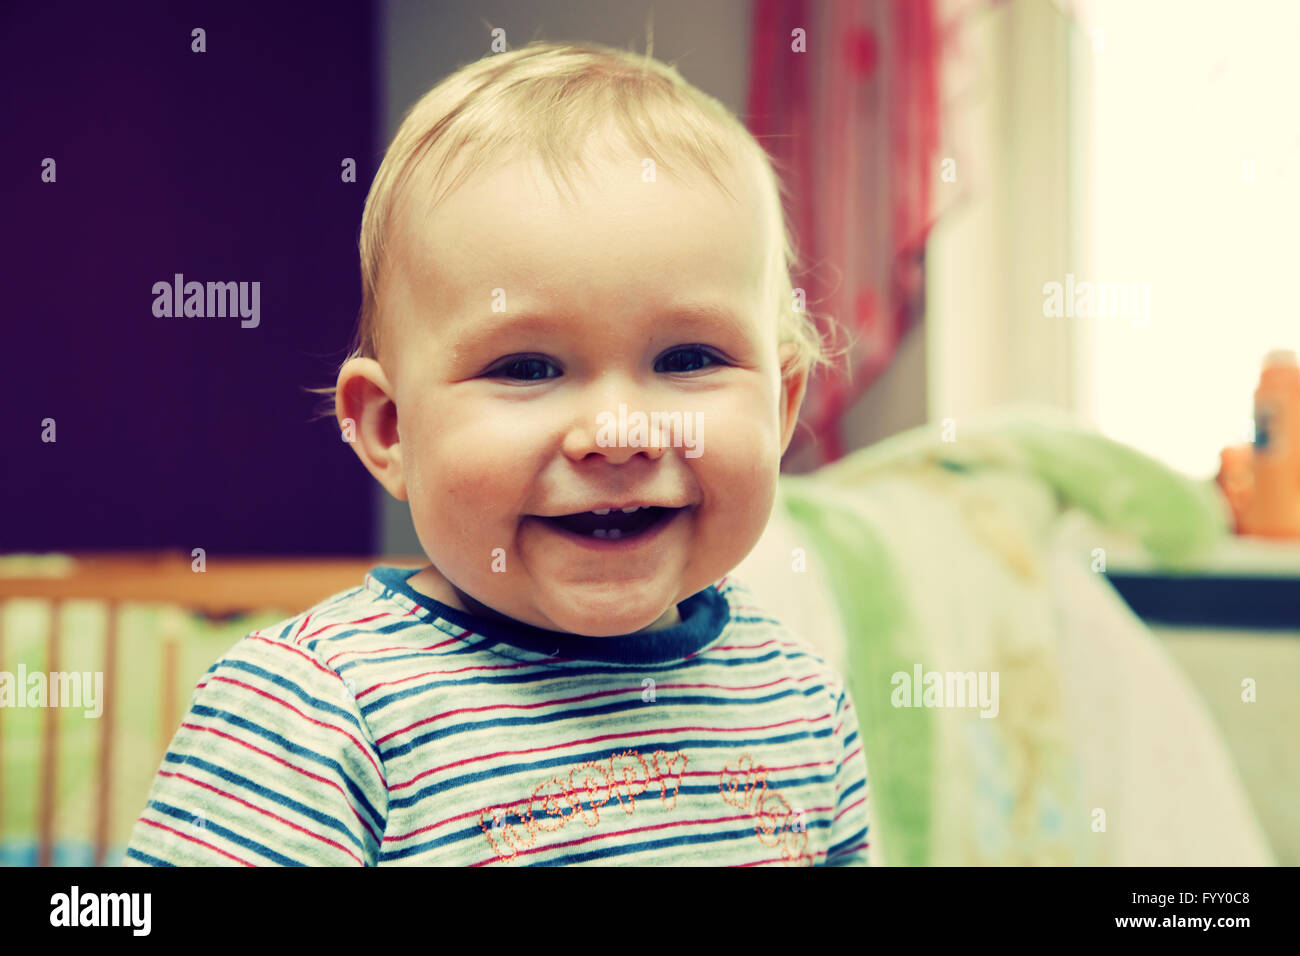 Happy kid laughing looking at the camera Stock Photo